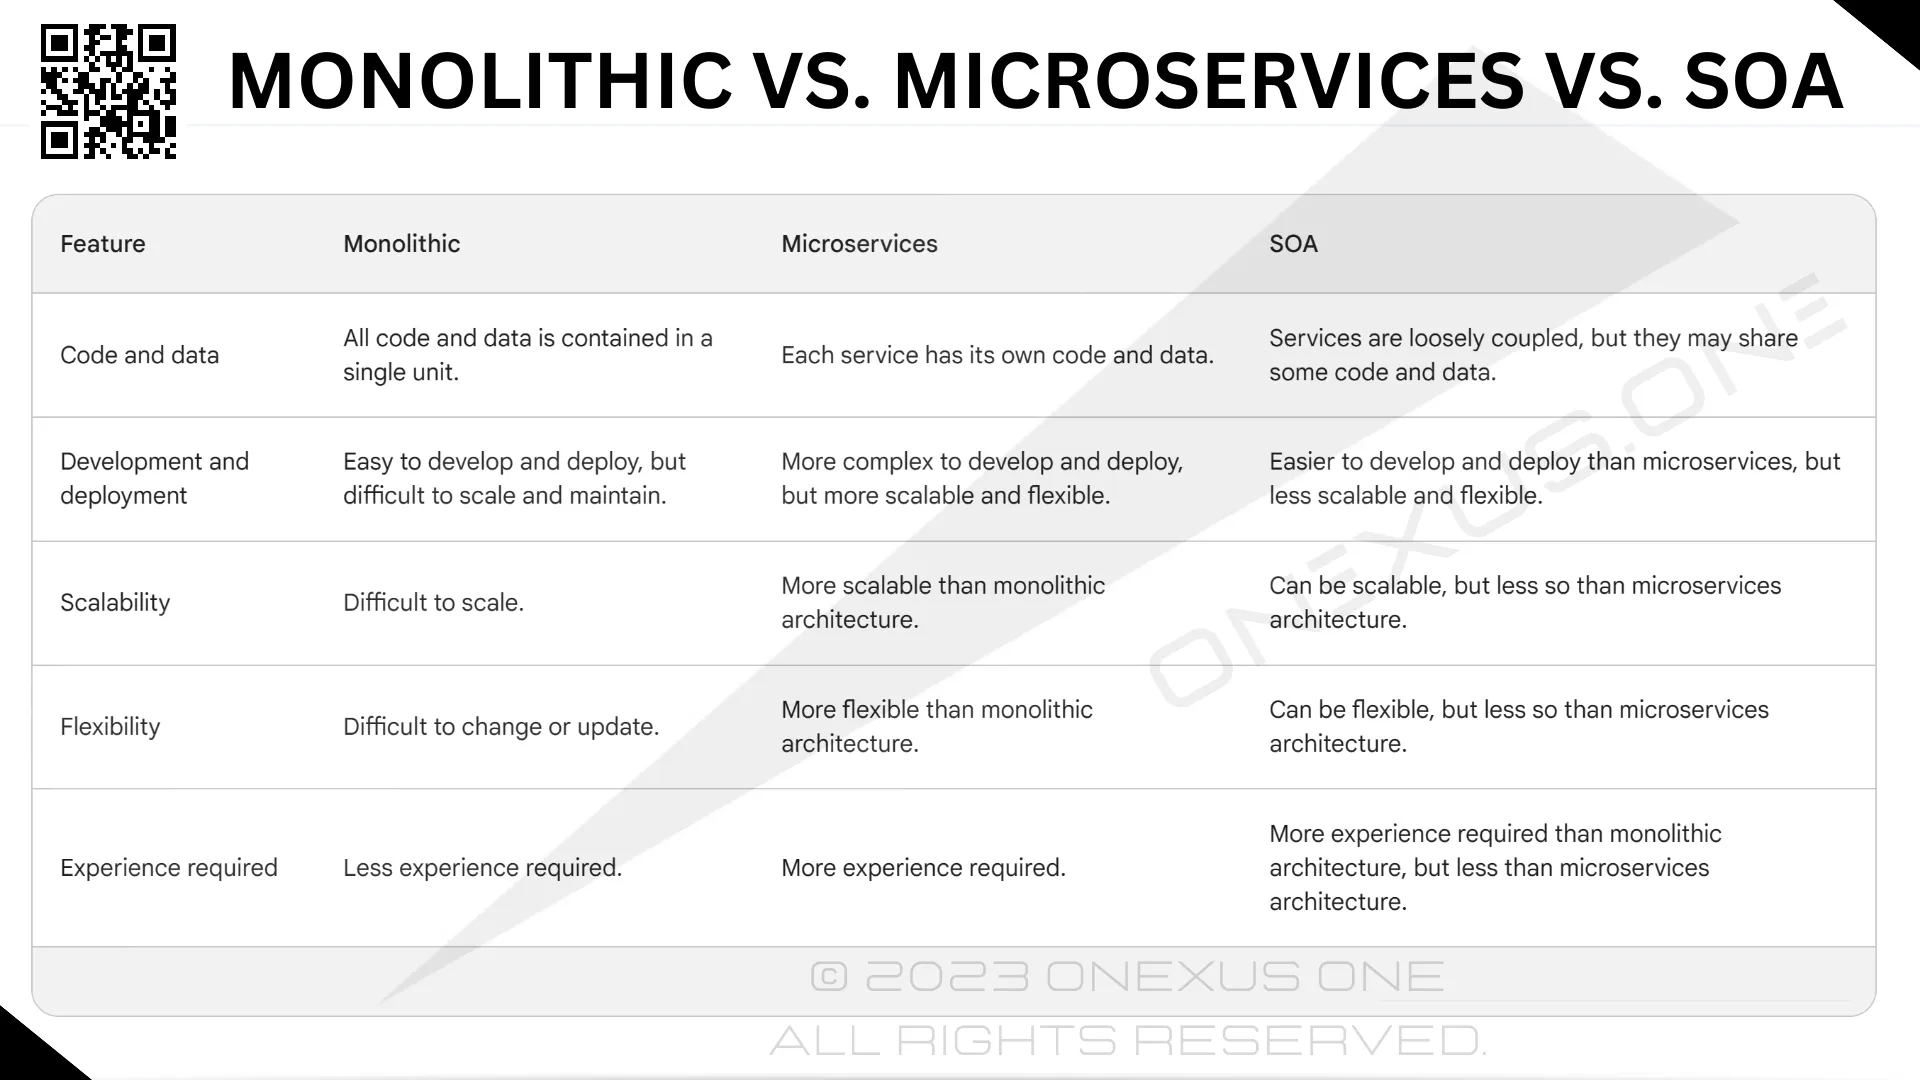 ⇛ Monolithic,
Microservices and SOA
in very simple terms.
.
.
.

#science
#technology
#engineering
#ai #strategy #ml